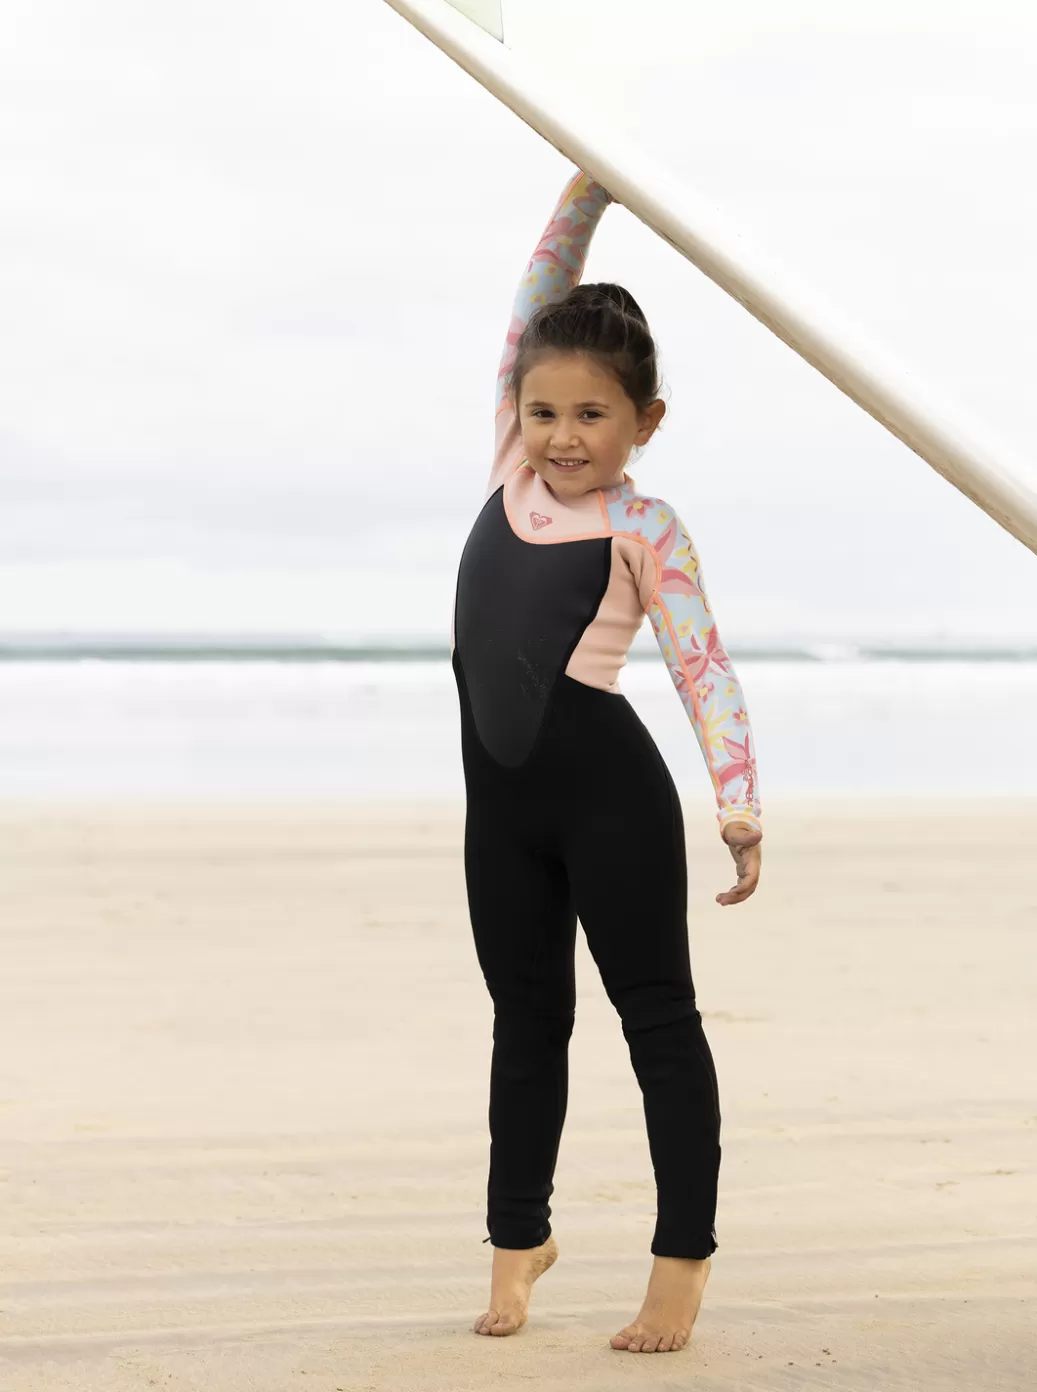 Surf | KIDS ROXY Girl's 2-7 3/2mm Prologue Back Zip Wetsuit Tanager Tur Tw Floral Conf